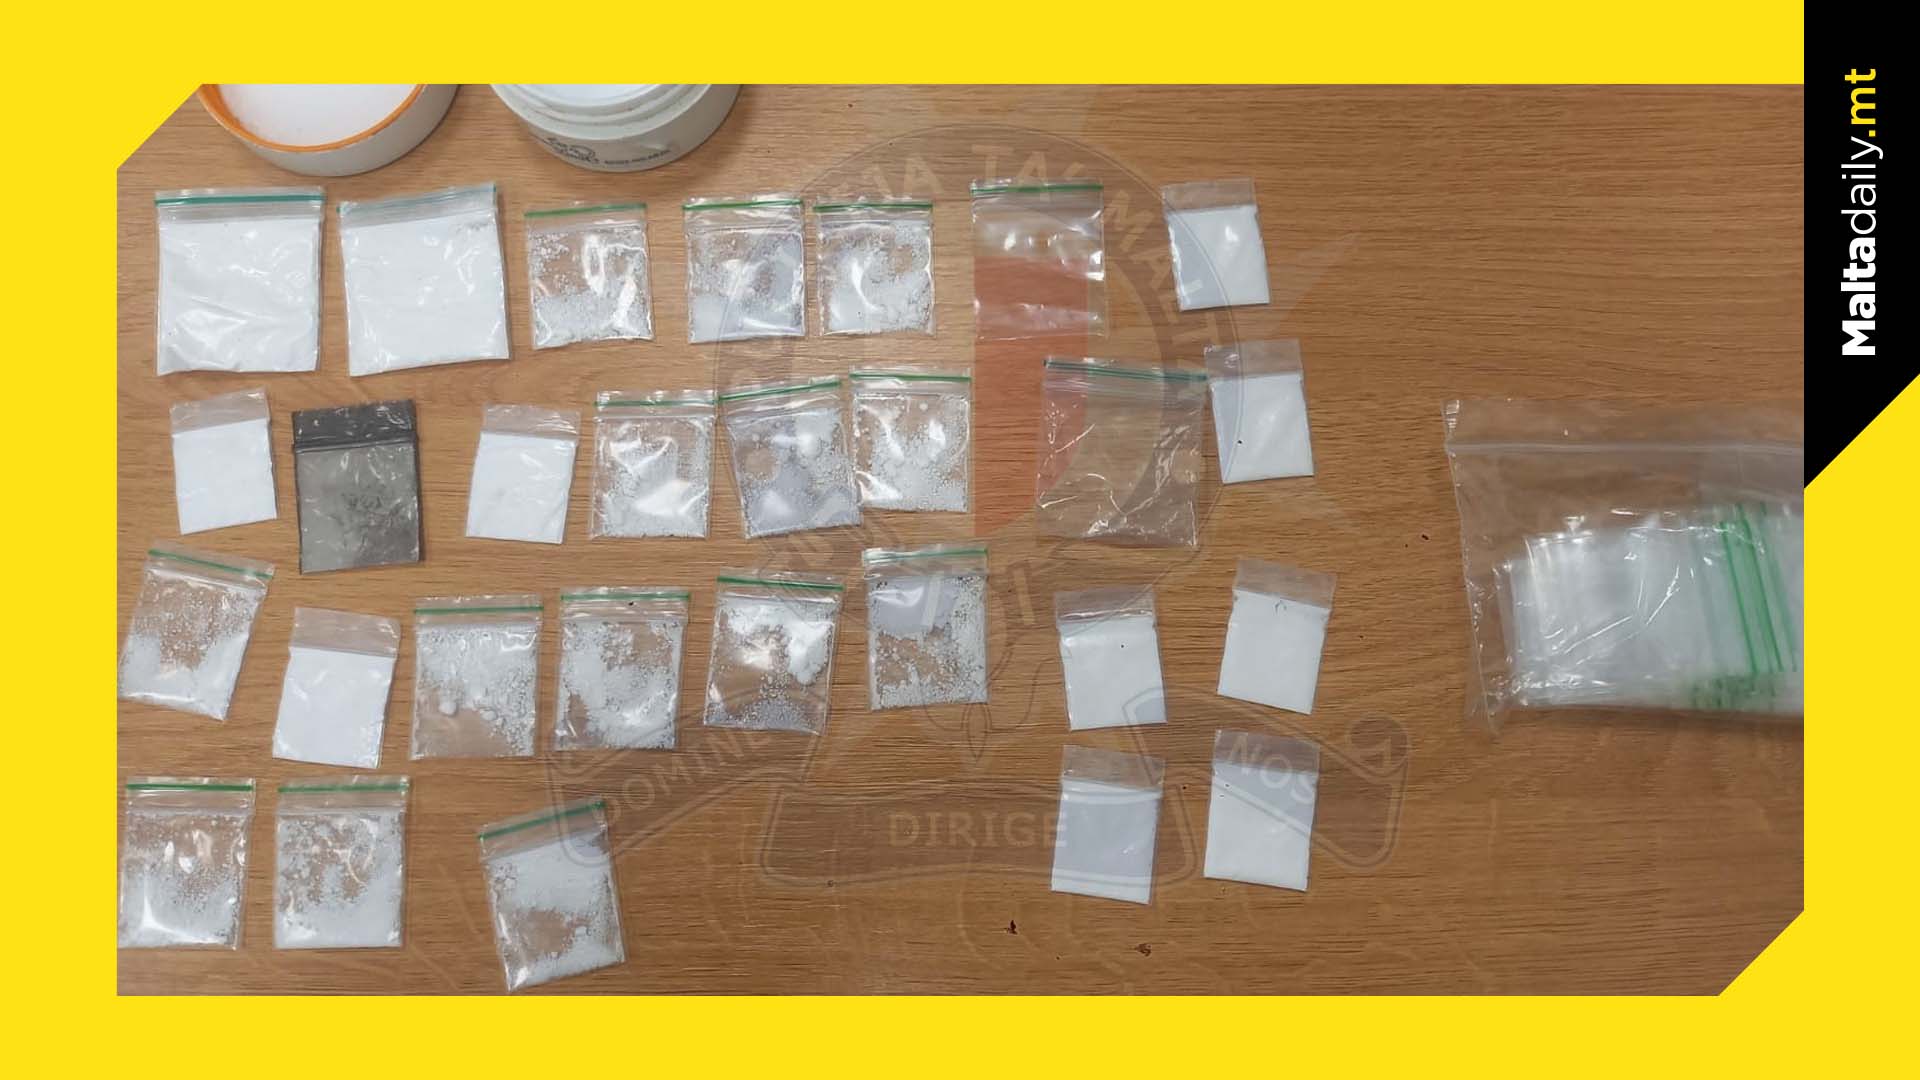 Man In Possession Of 30 Cocaine & Cannabis Packets Arrested